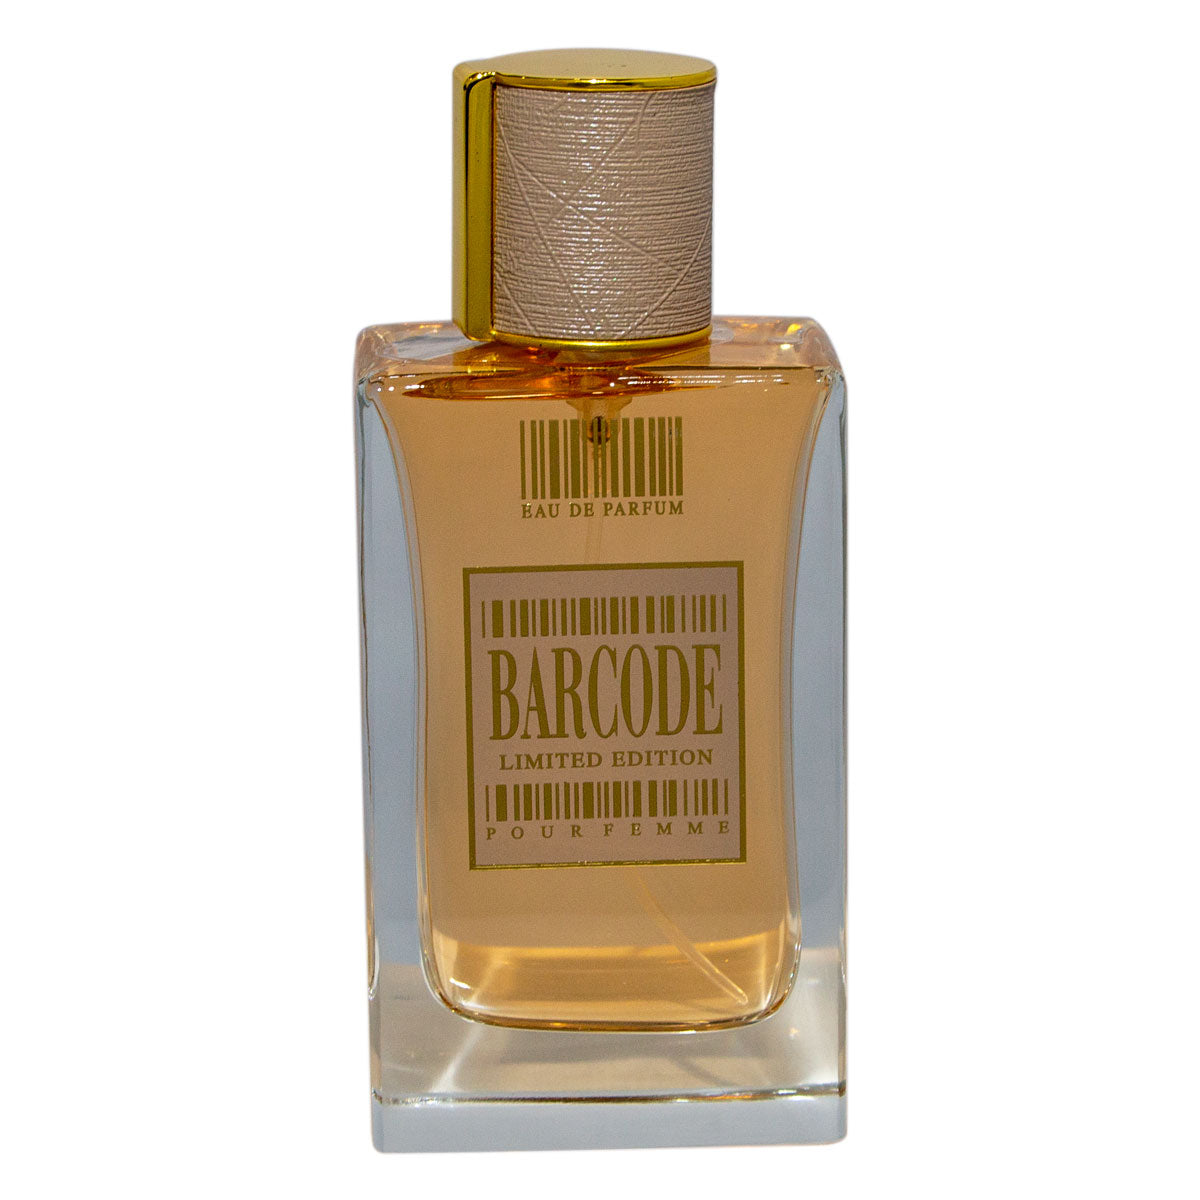 Barcode Limited Edition Pour Femme for Women EDP 80ml - samawa perfumes 